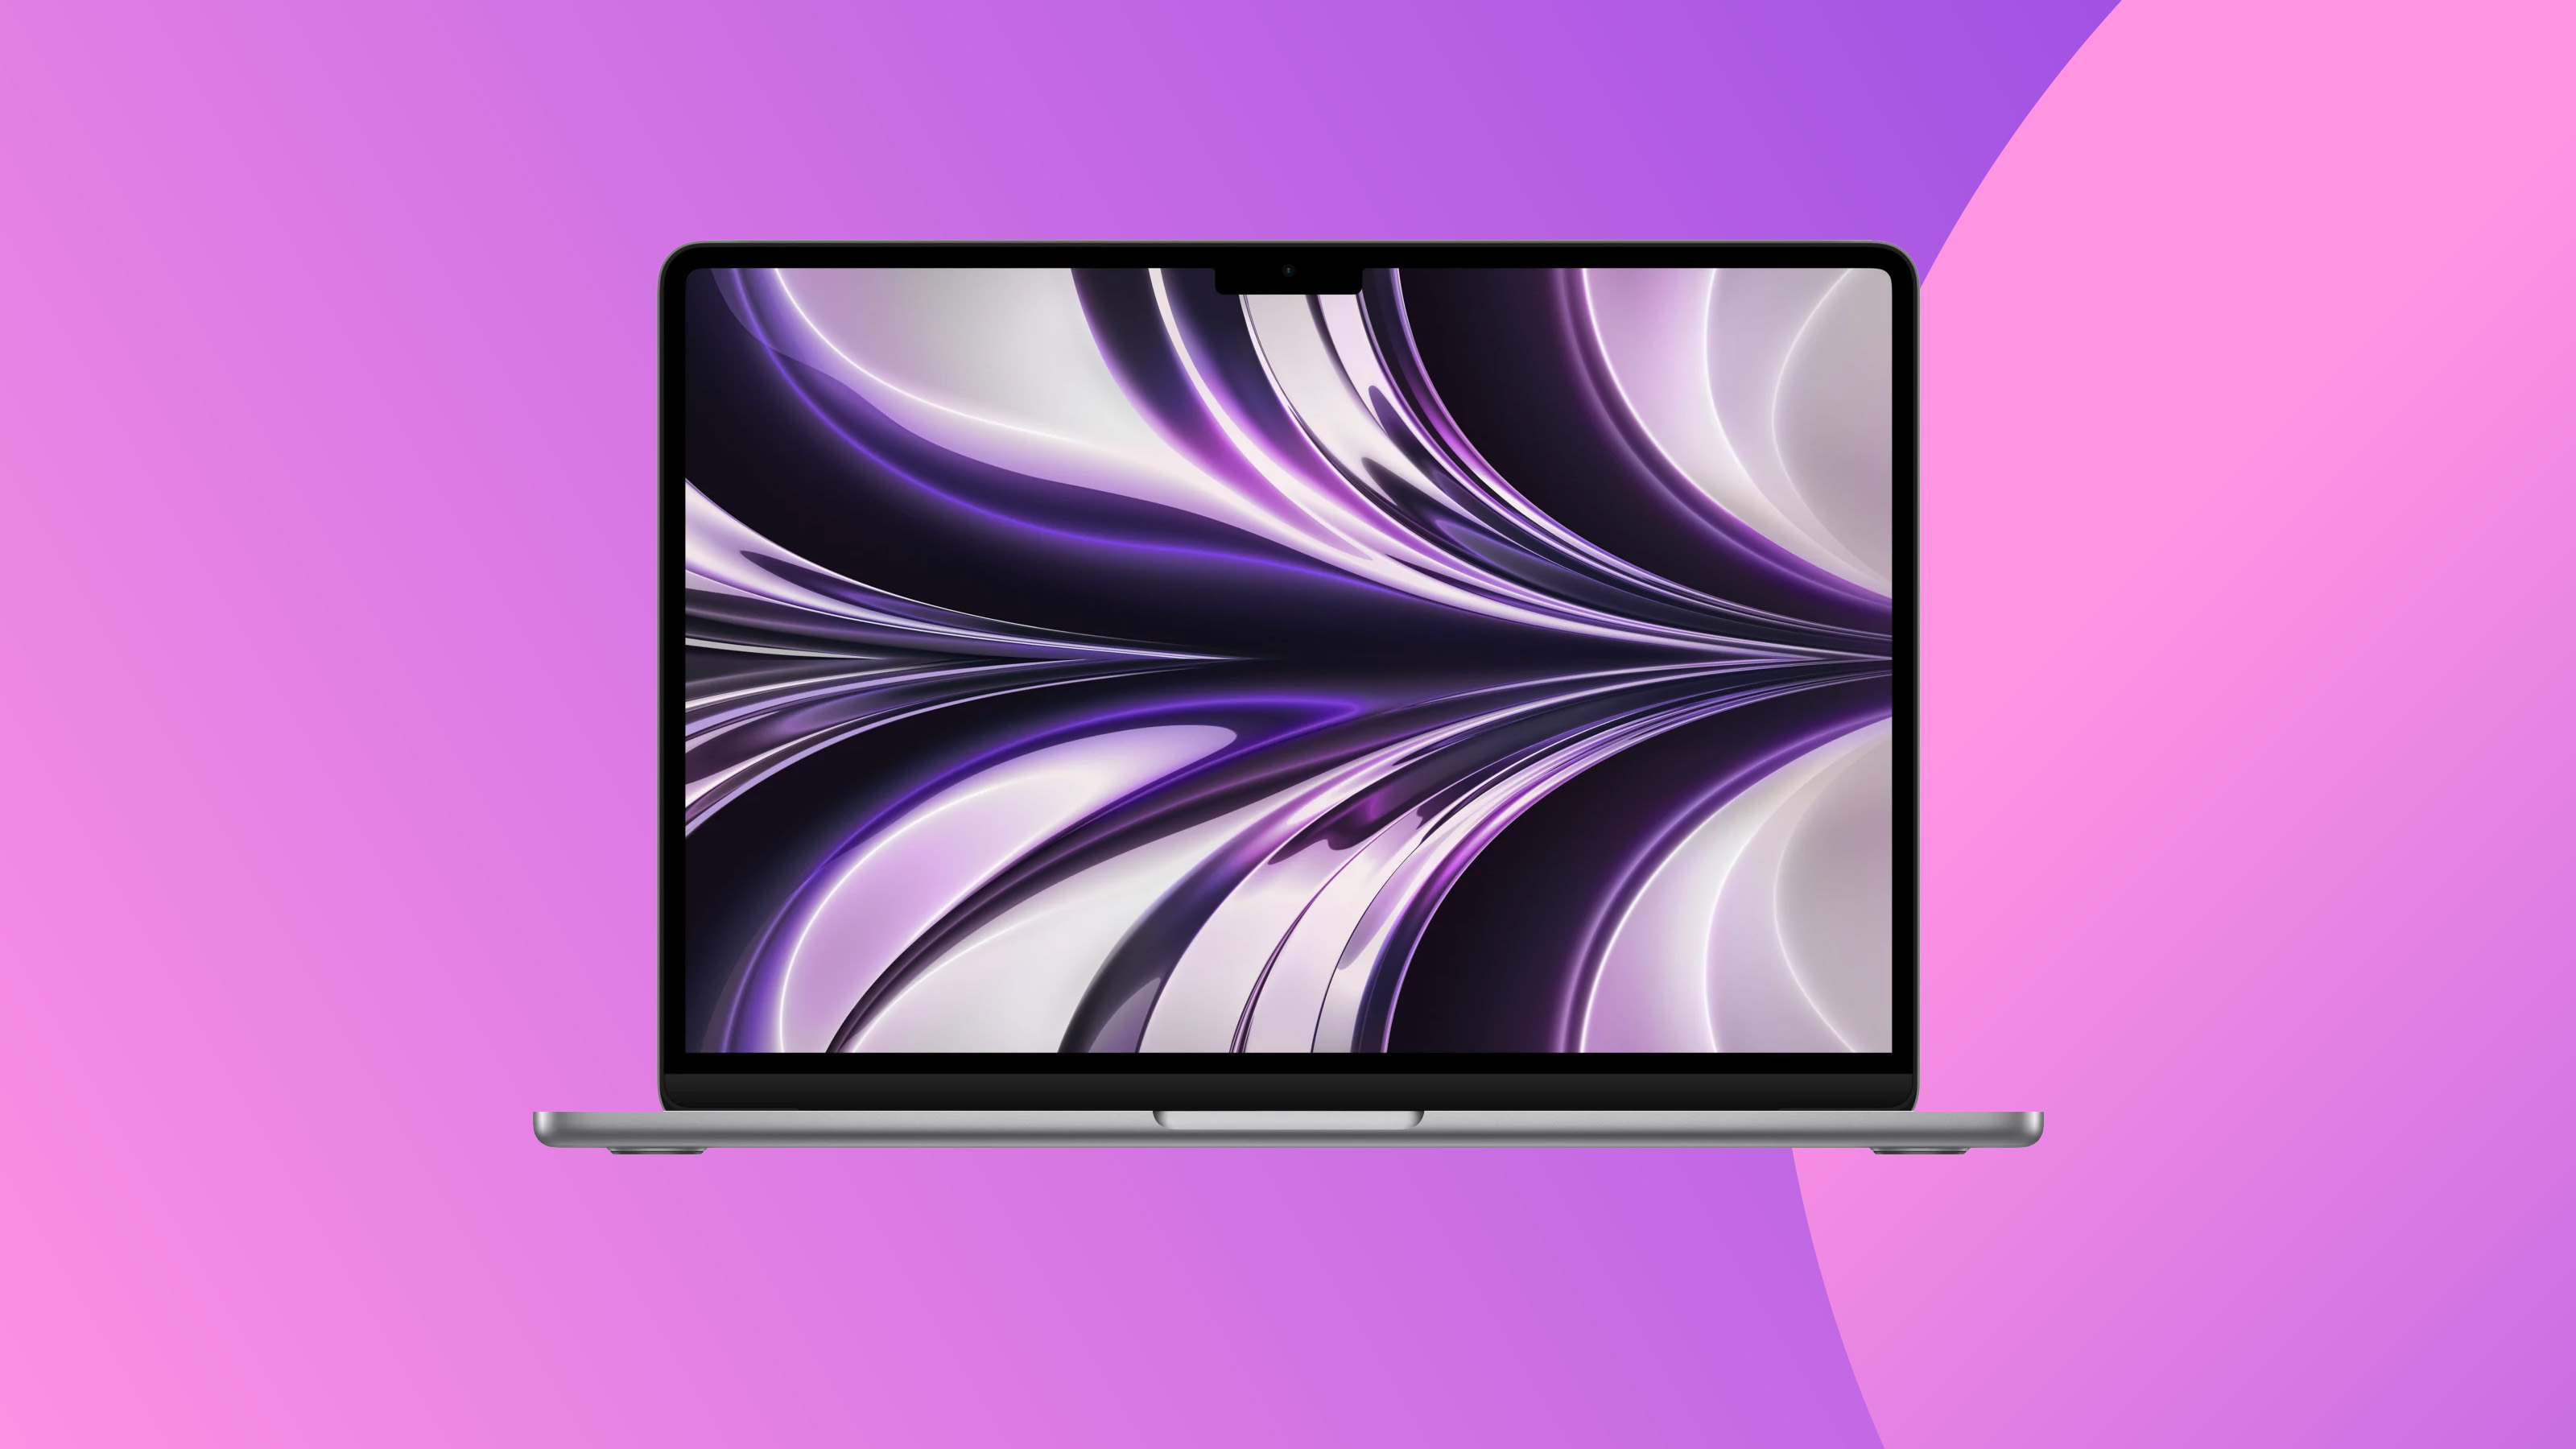 A product shot of the 2022 macbook air on a colourful background